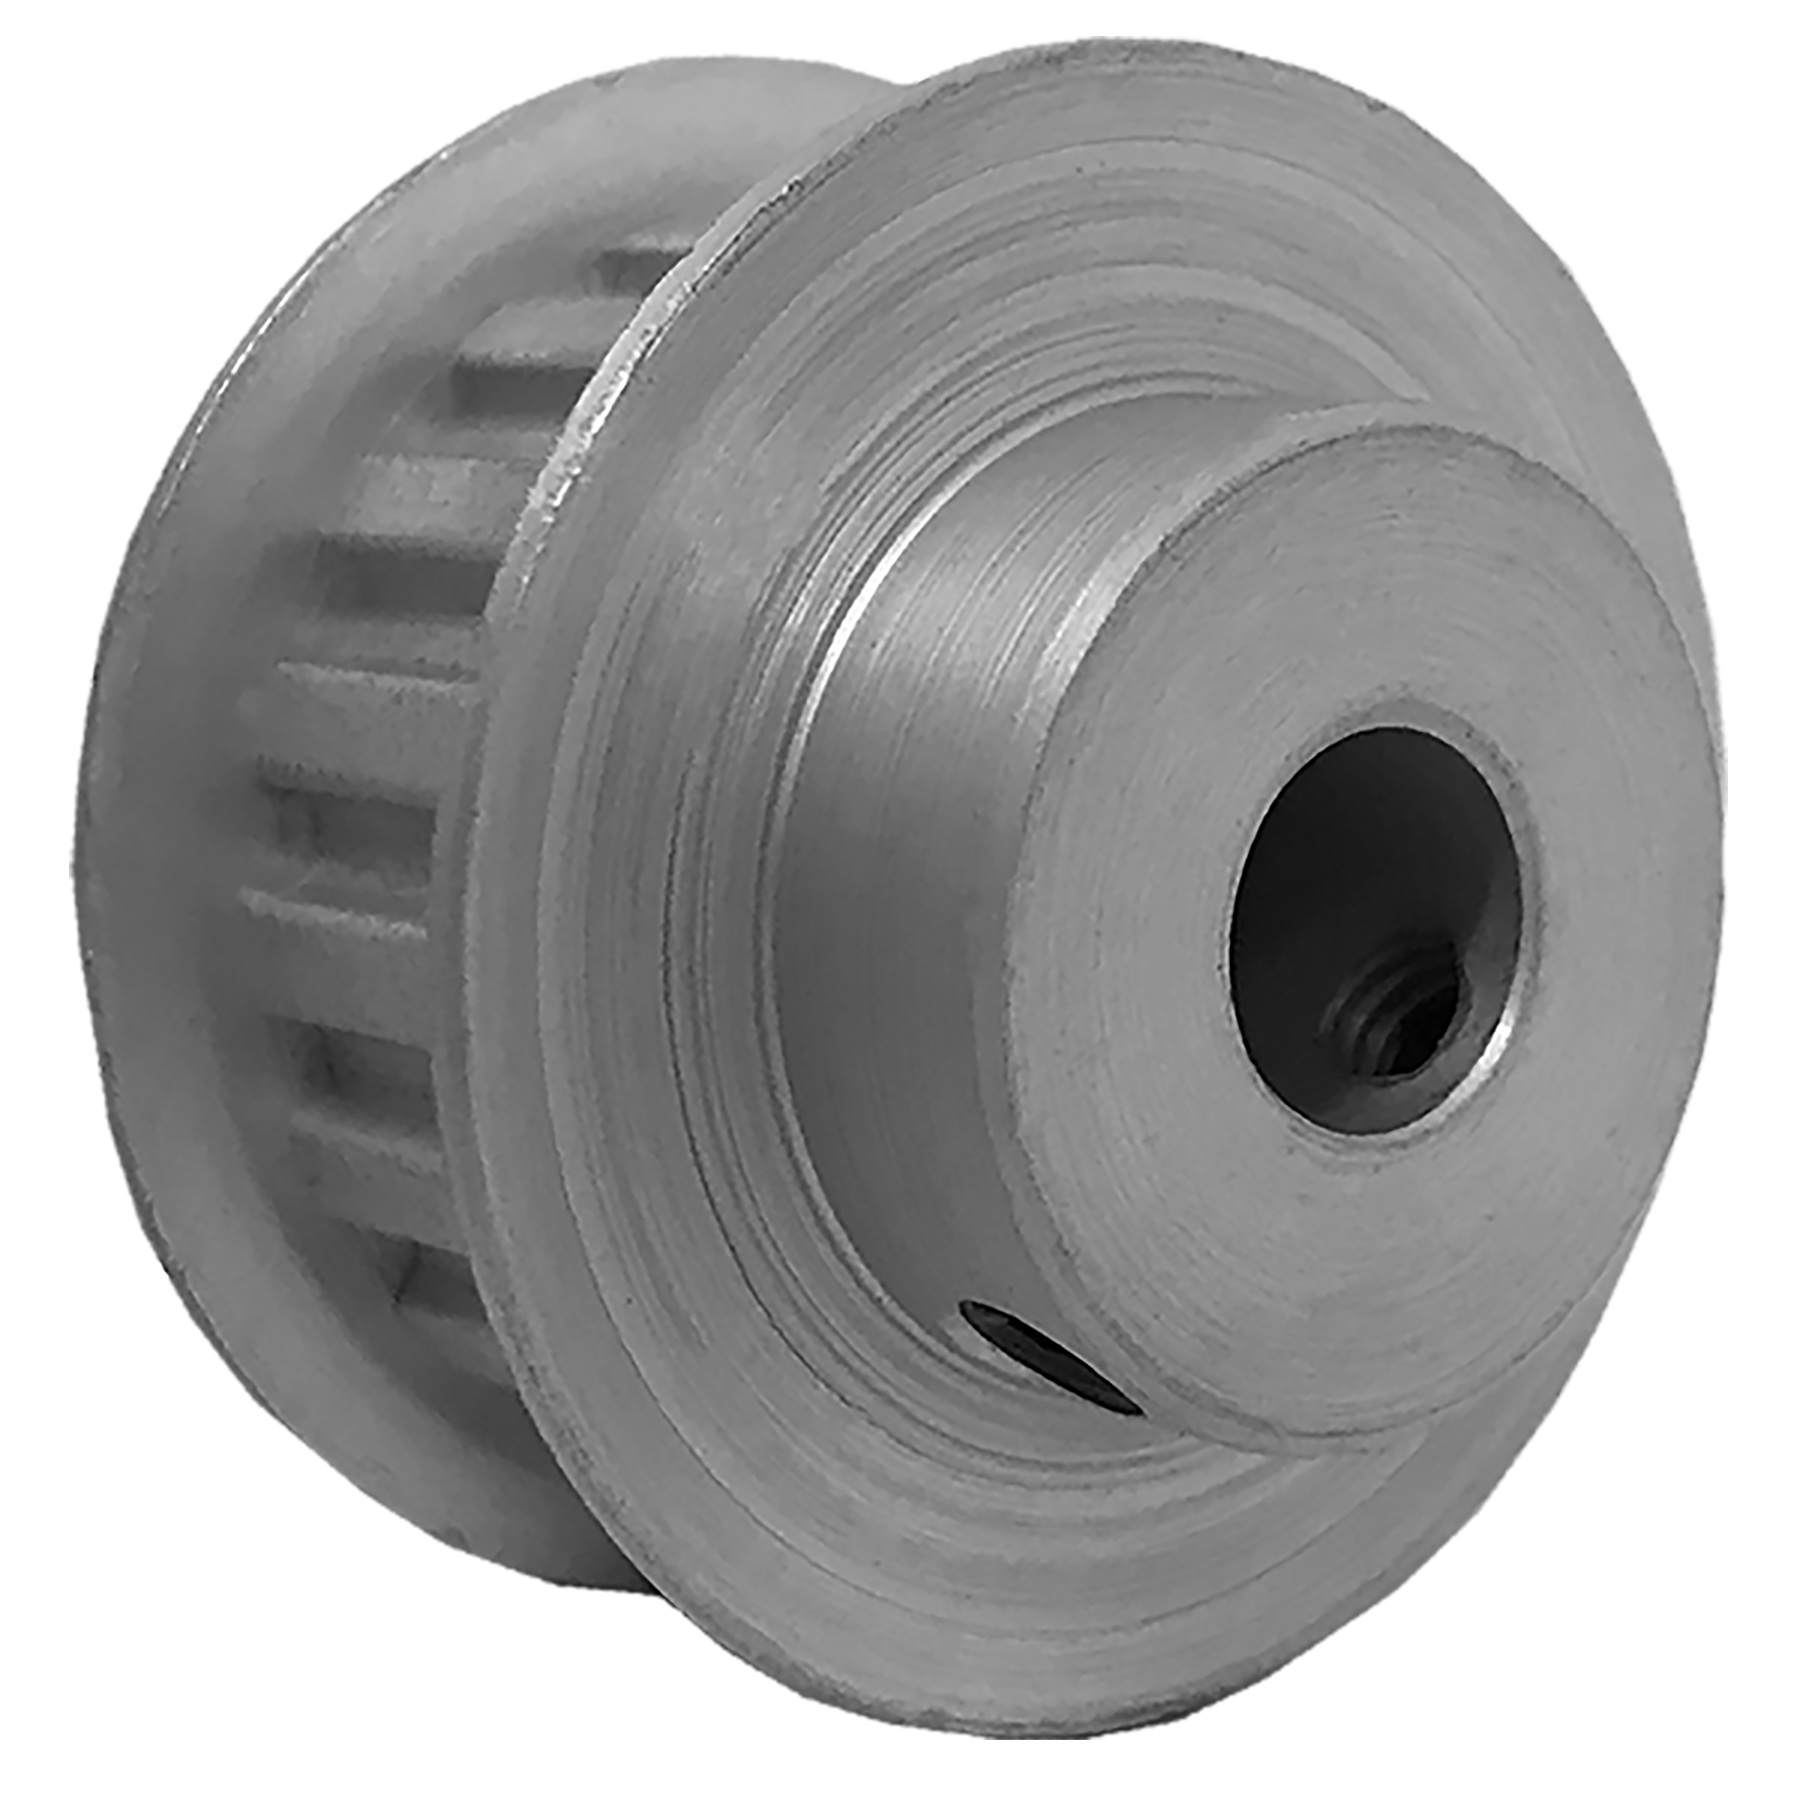 18XL037-6FA4 - Aluminum Imperial Pitch Pulleys